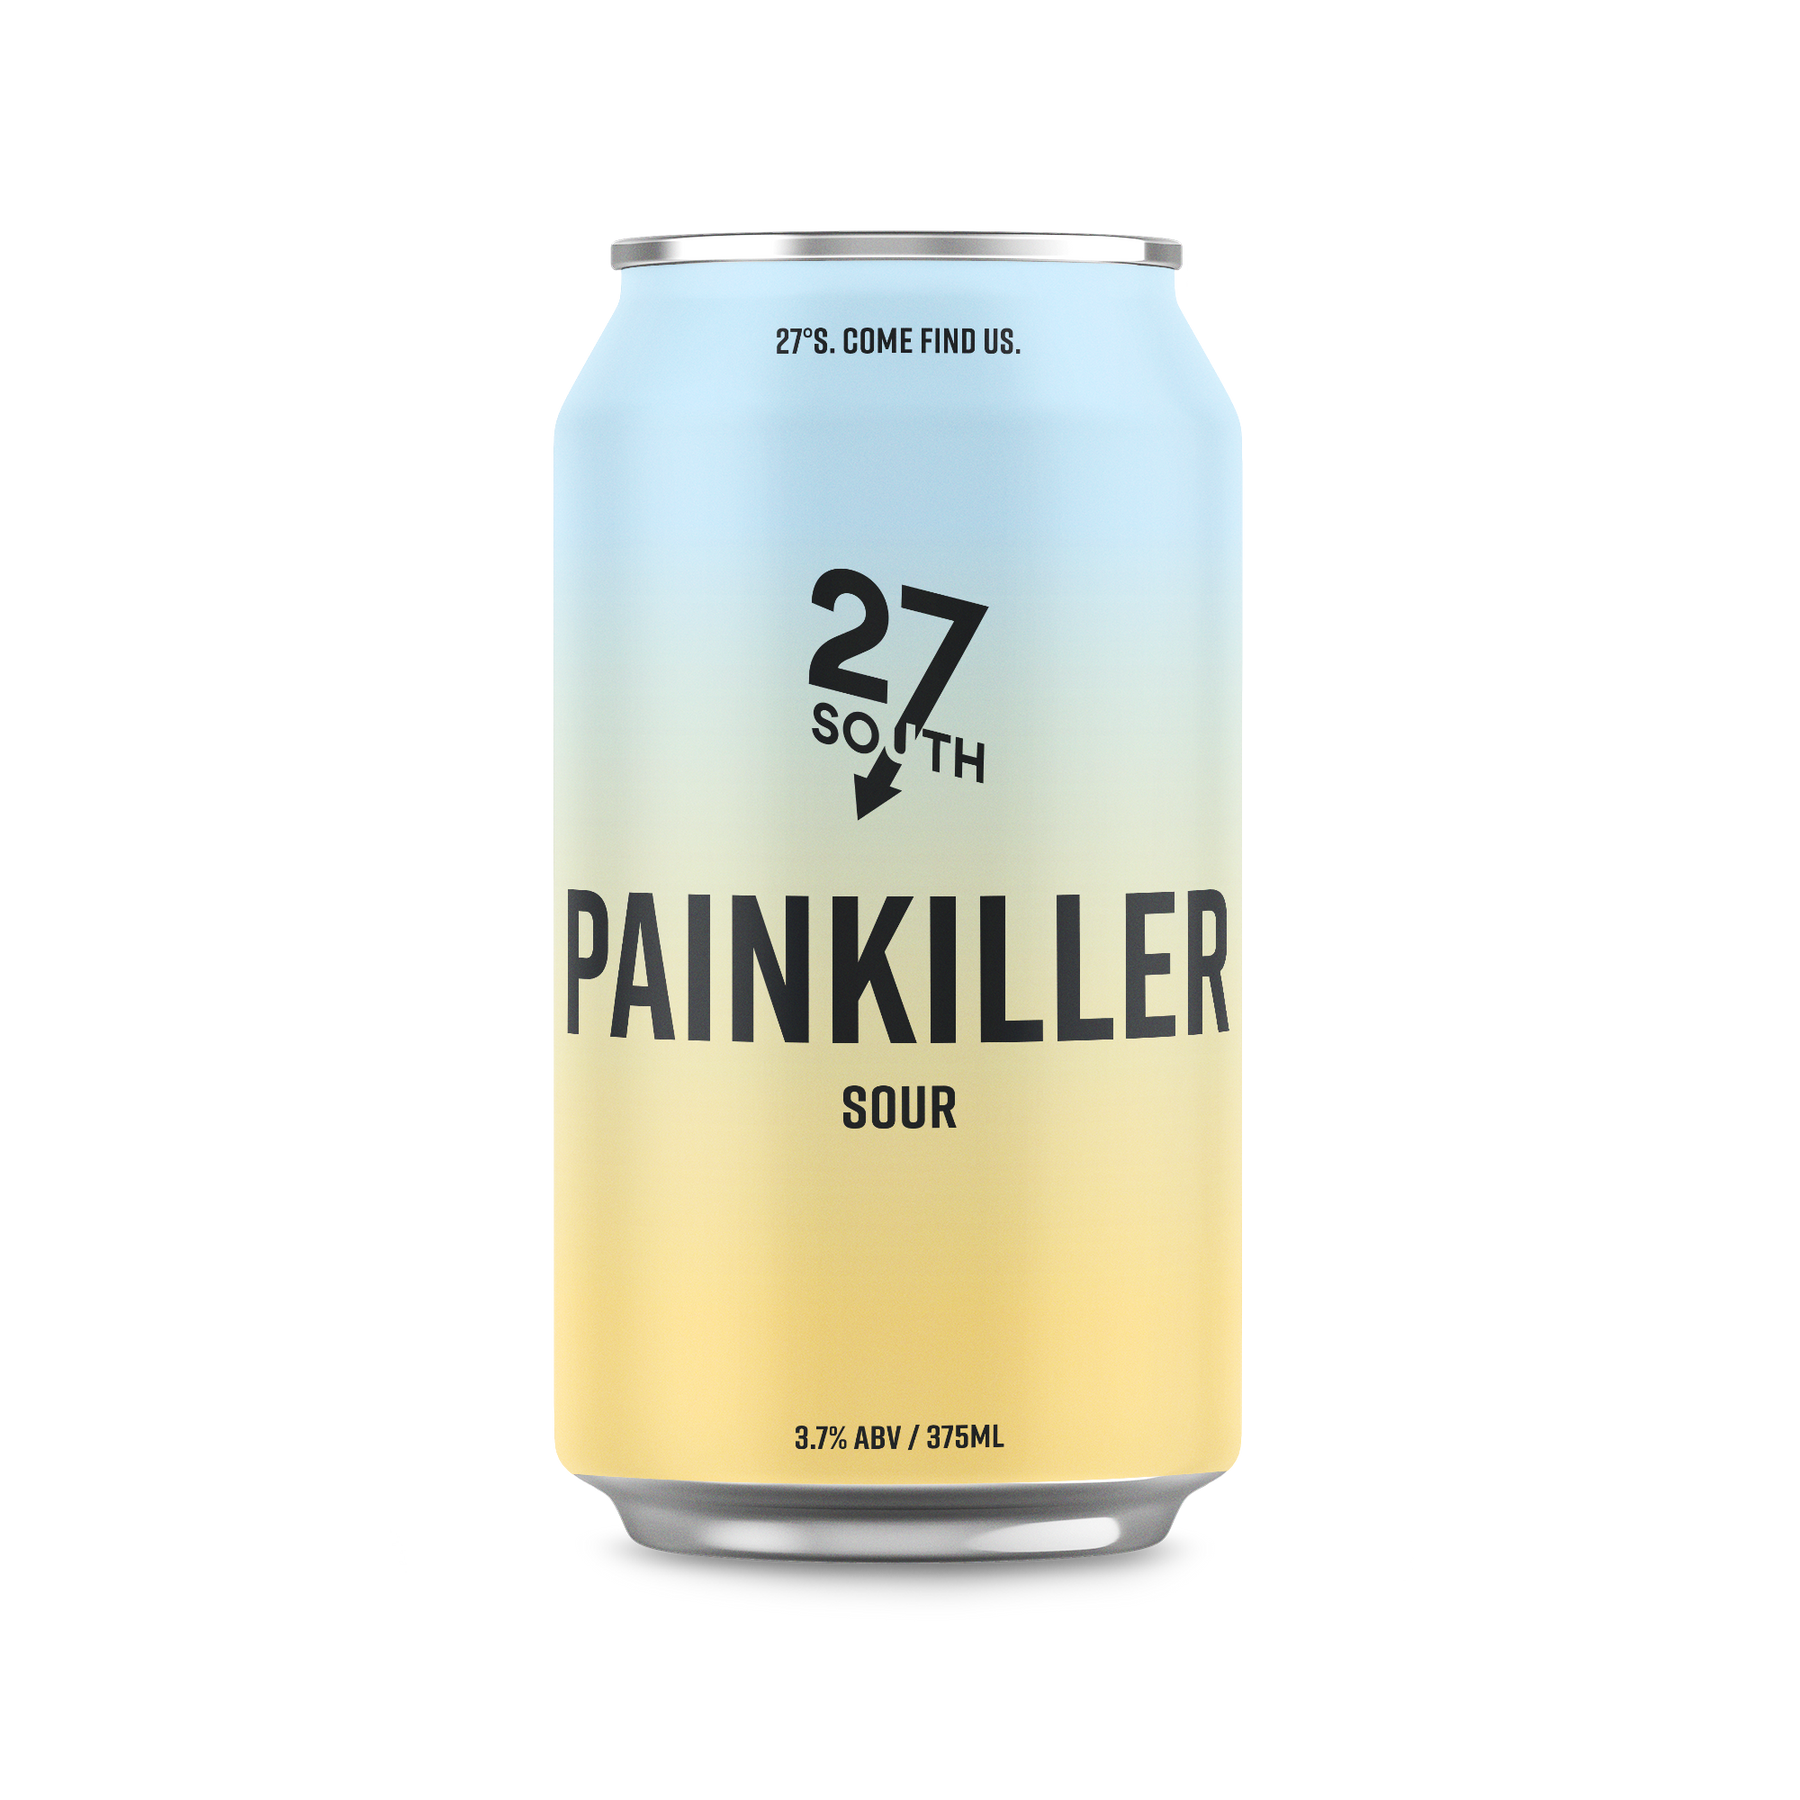 Painkiller - Pineapple, Orange, Coconut and Spiced Rum Sour